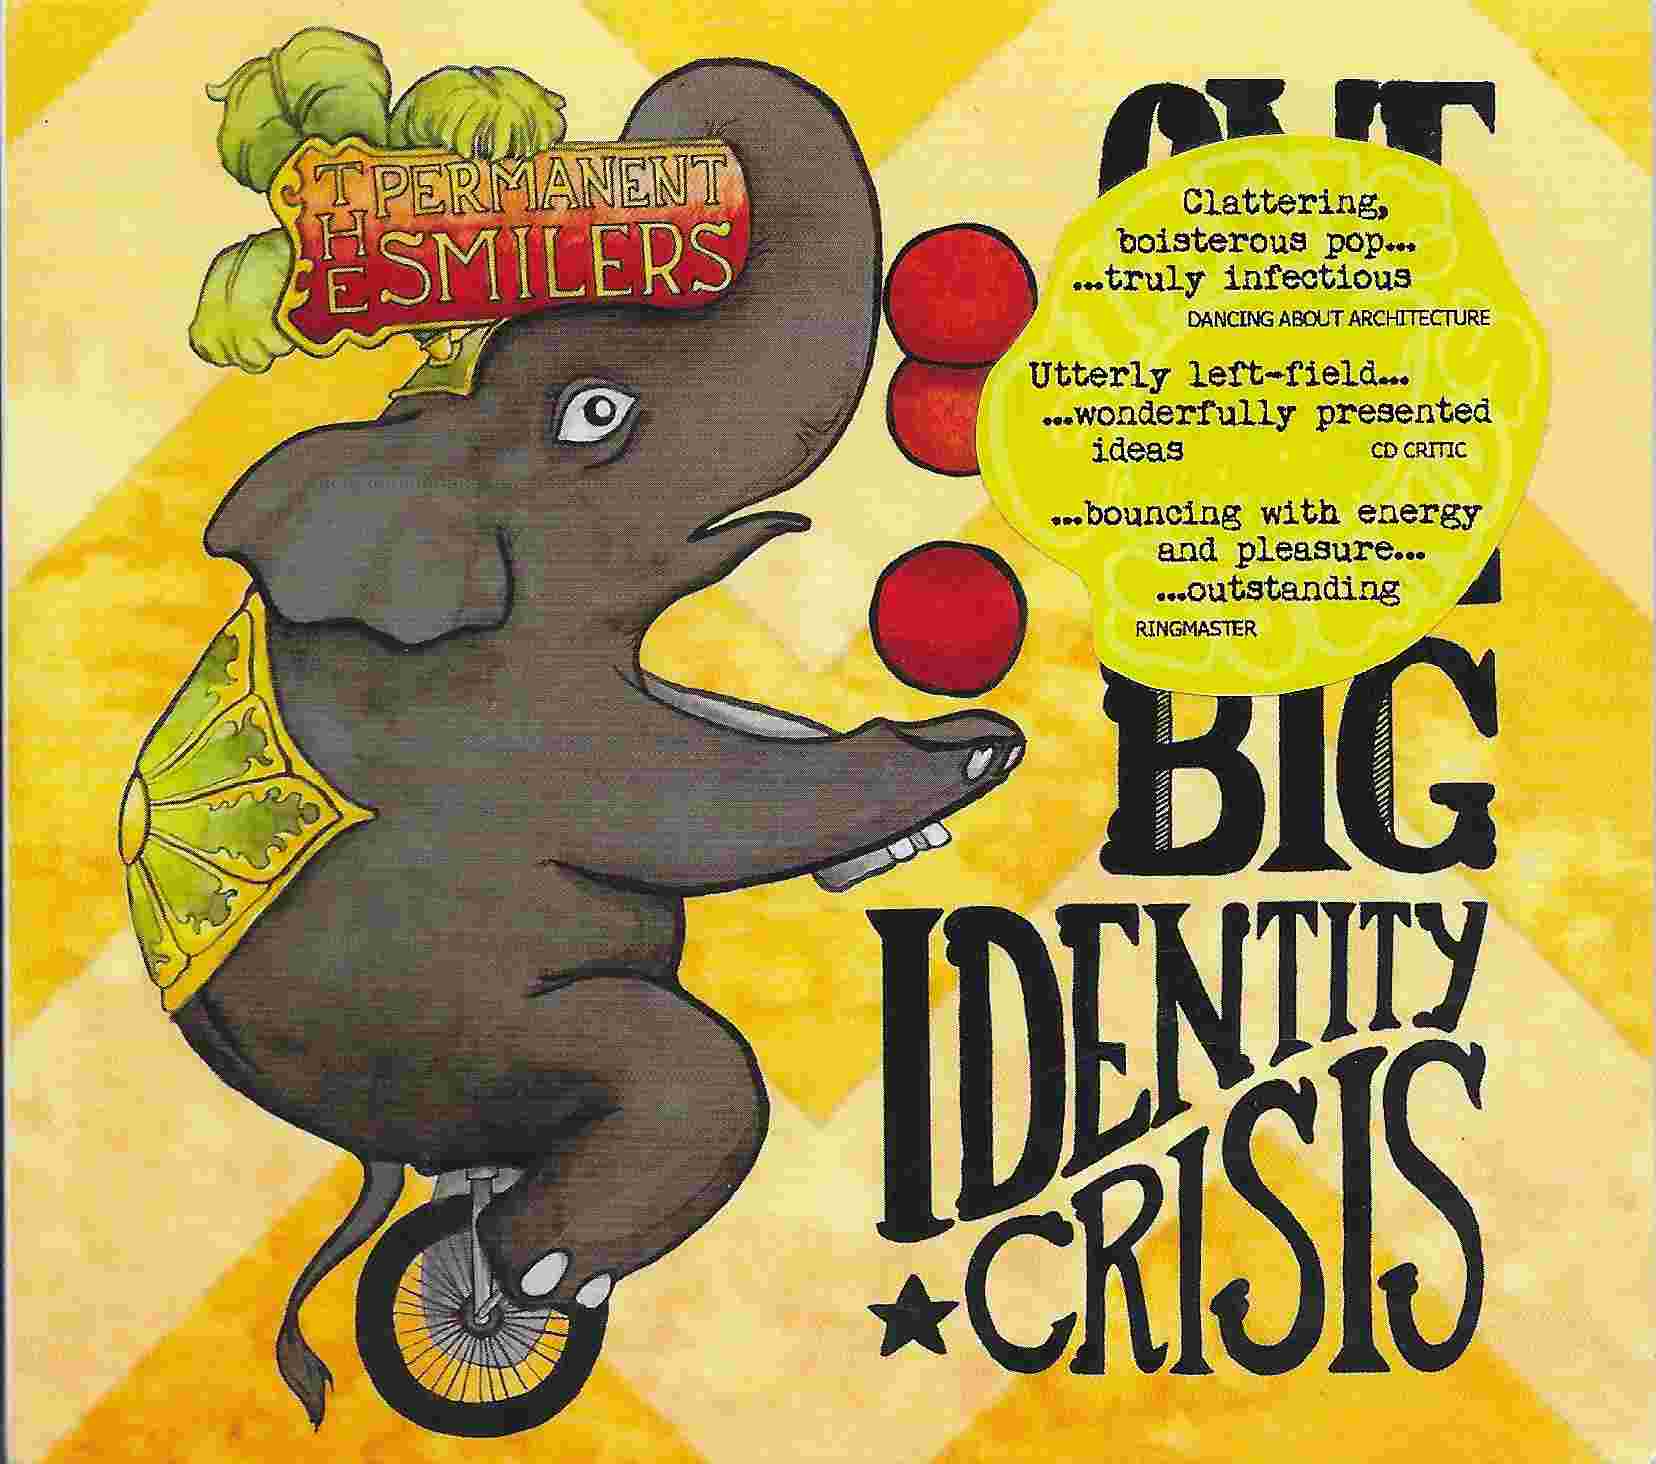 Picture of CITRIC 10 One real big identity crisis by artist The Permanent Smilers  from The Stranglers cds